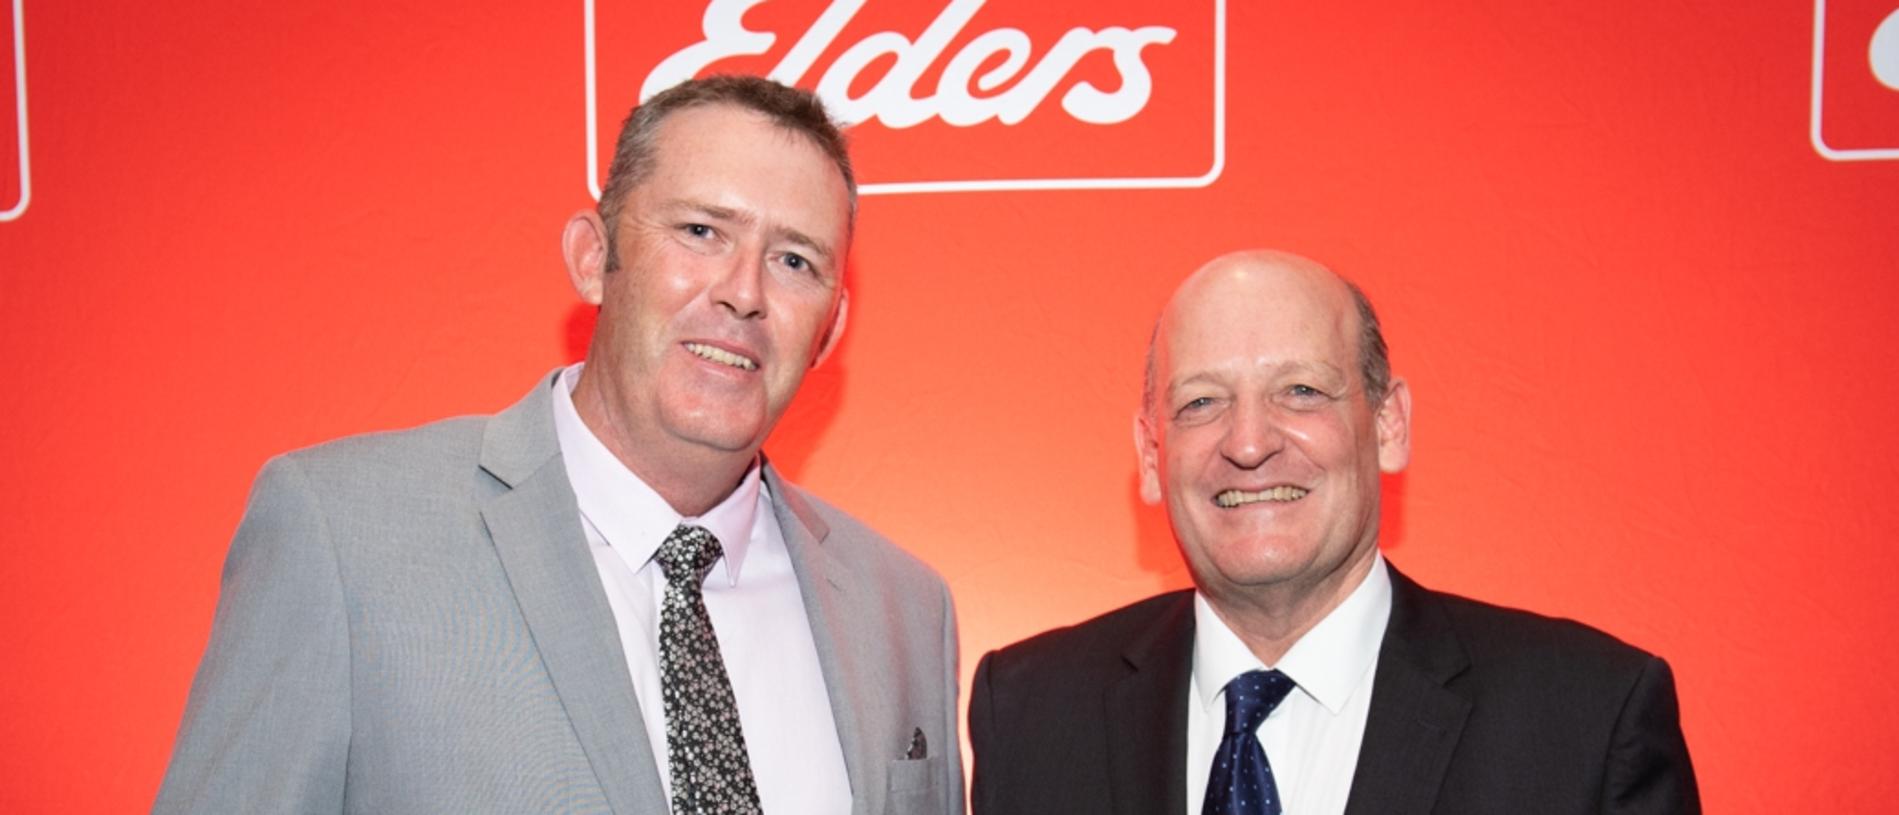 Elders Katherine branch manager Paul McCormick with Elders CEO and managing director Mark Allison at the One Elders Awards. Picture: SUPPLIED.